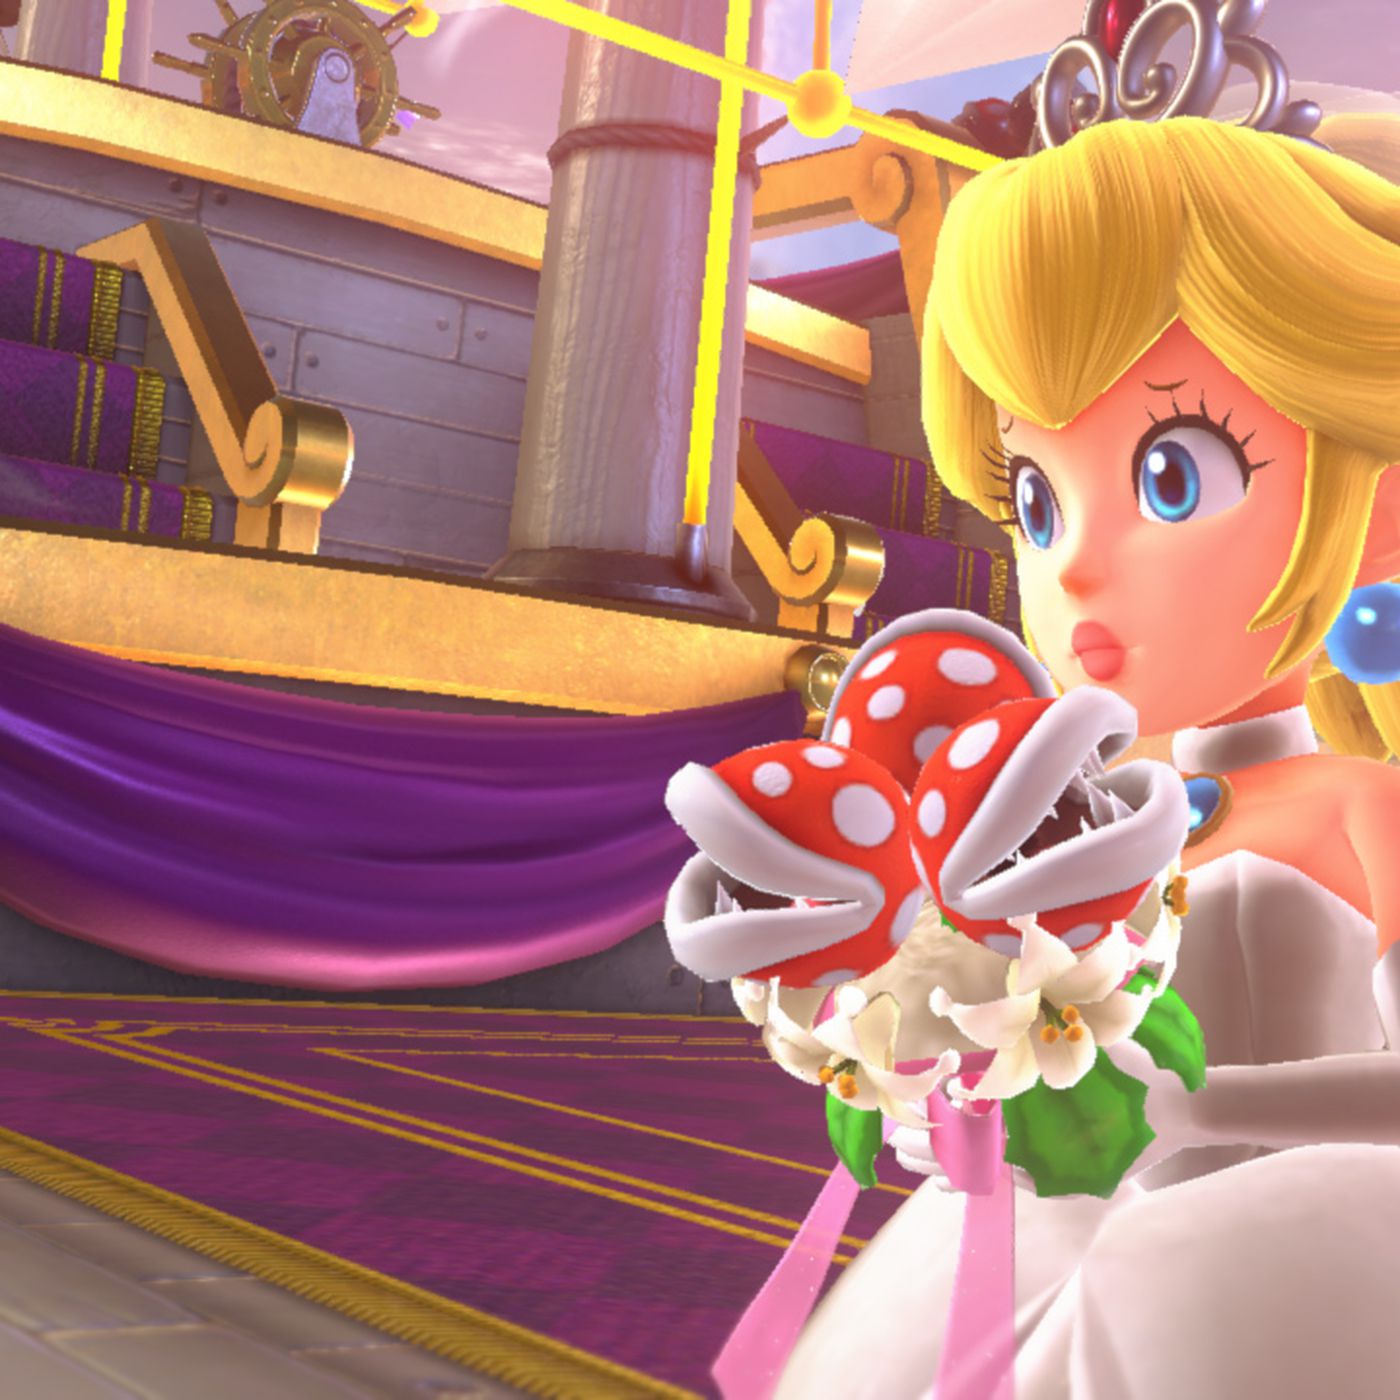 bary view recommends Mario Missing Peach Untold